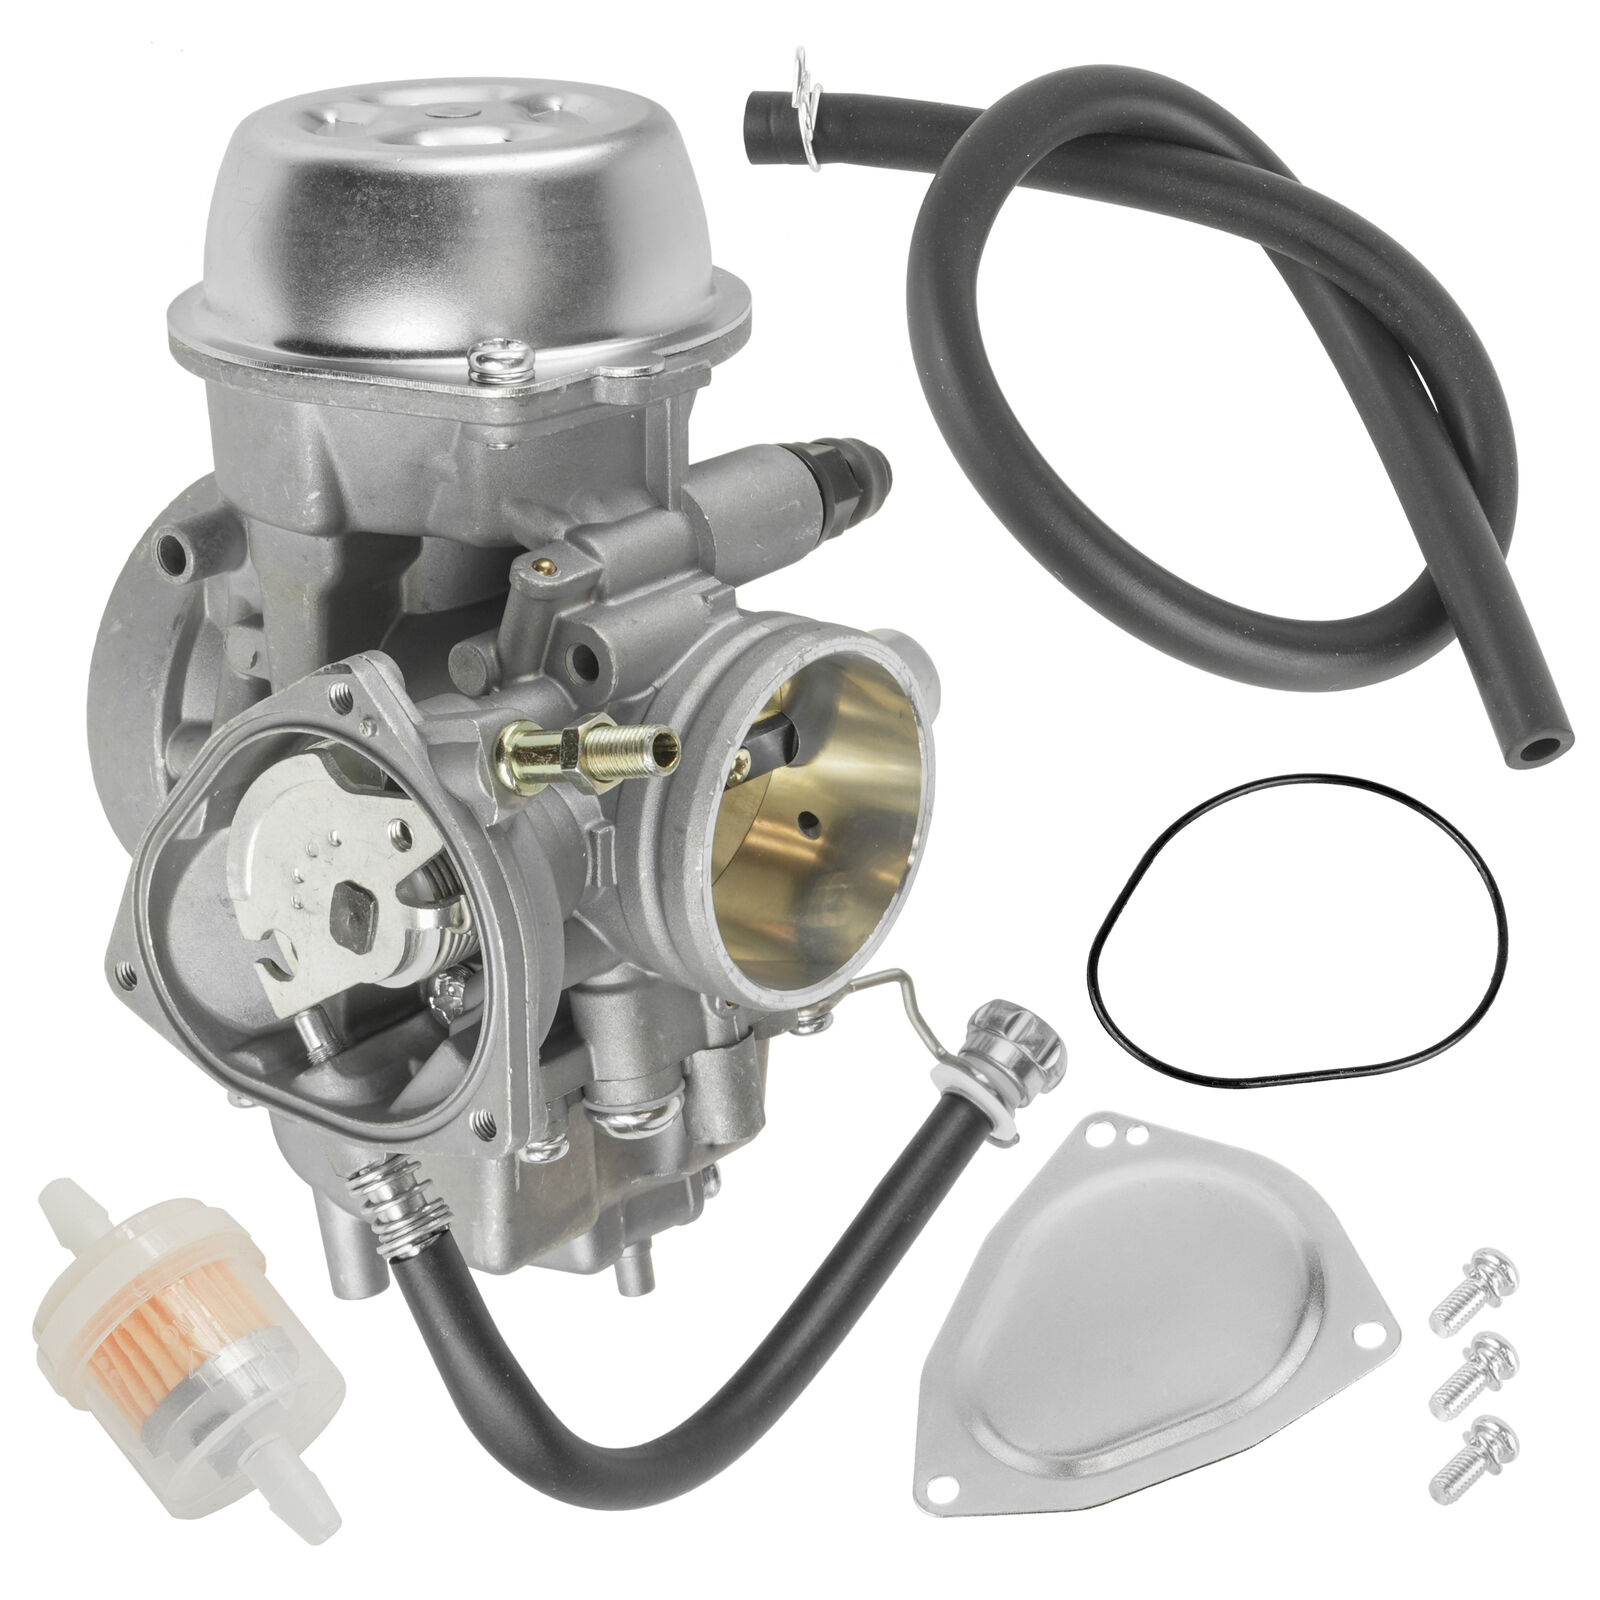 Carburetor for Yamaha Grizzly 660 YFM660 2002-2008 New Carb